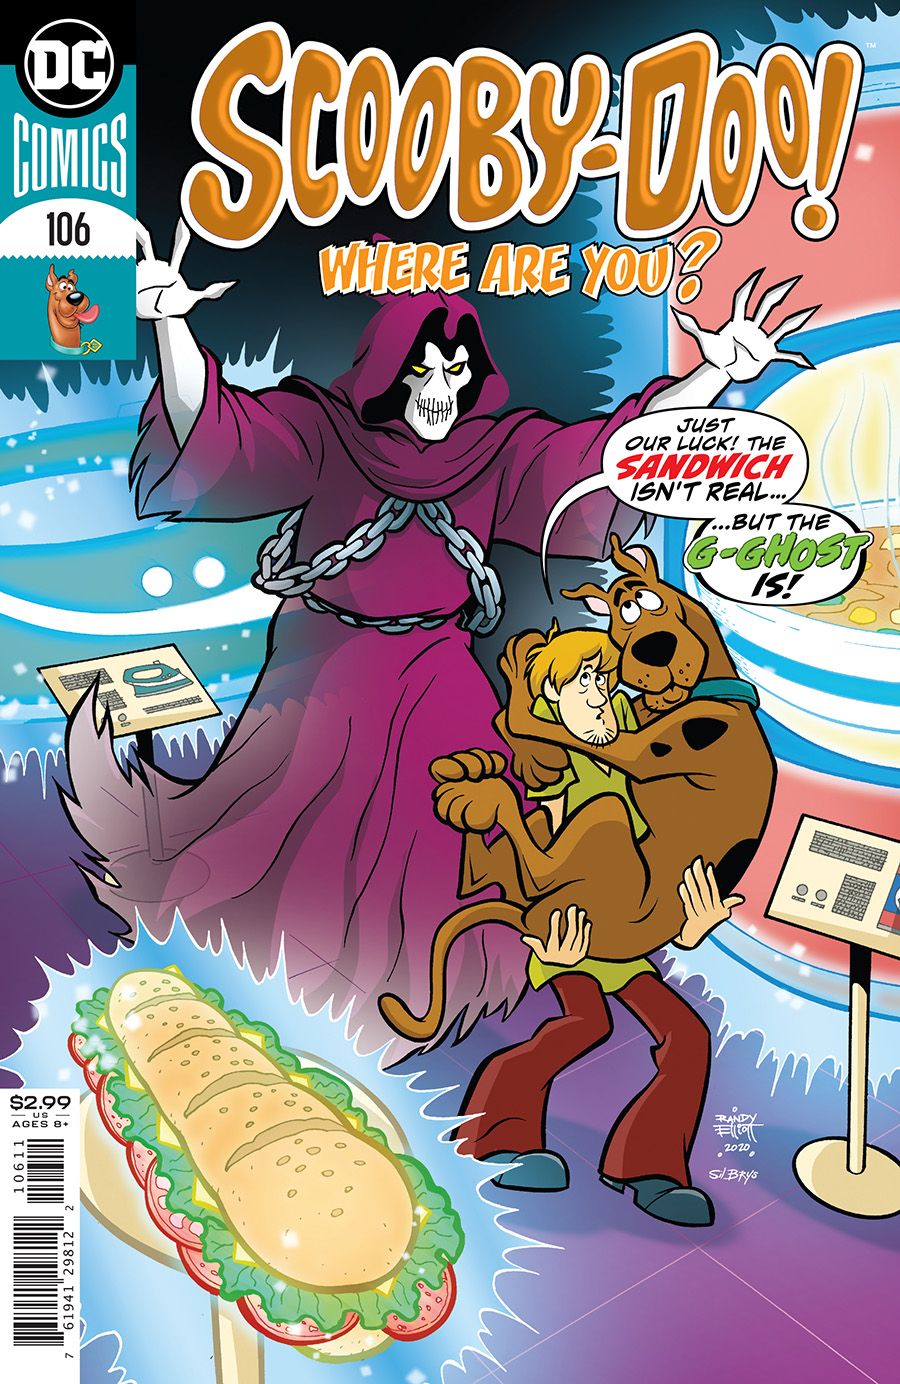 Scooby Doo Where Are You #106 Comic